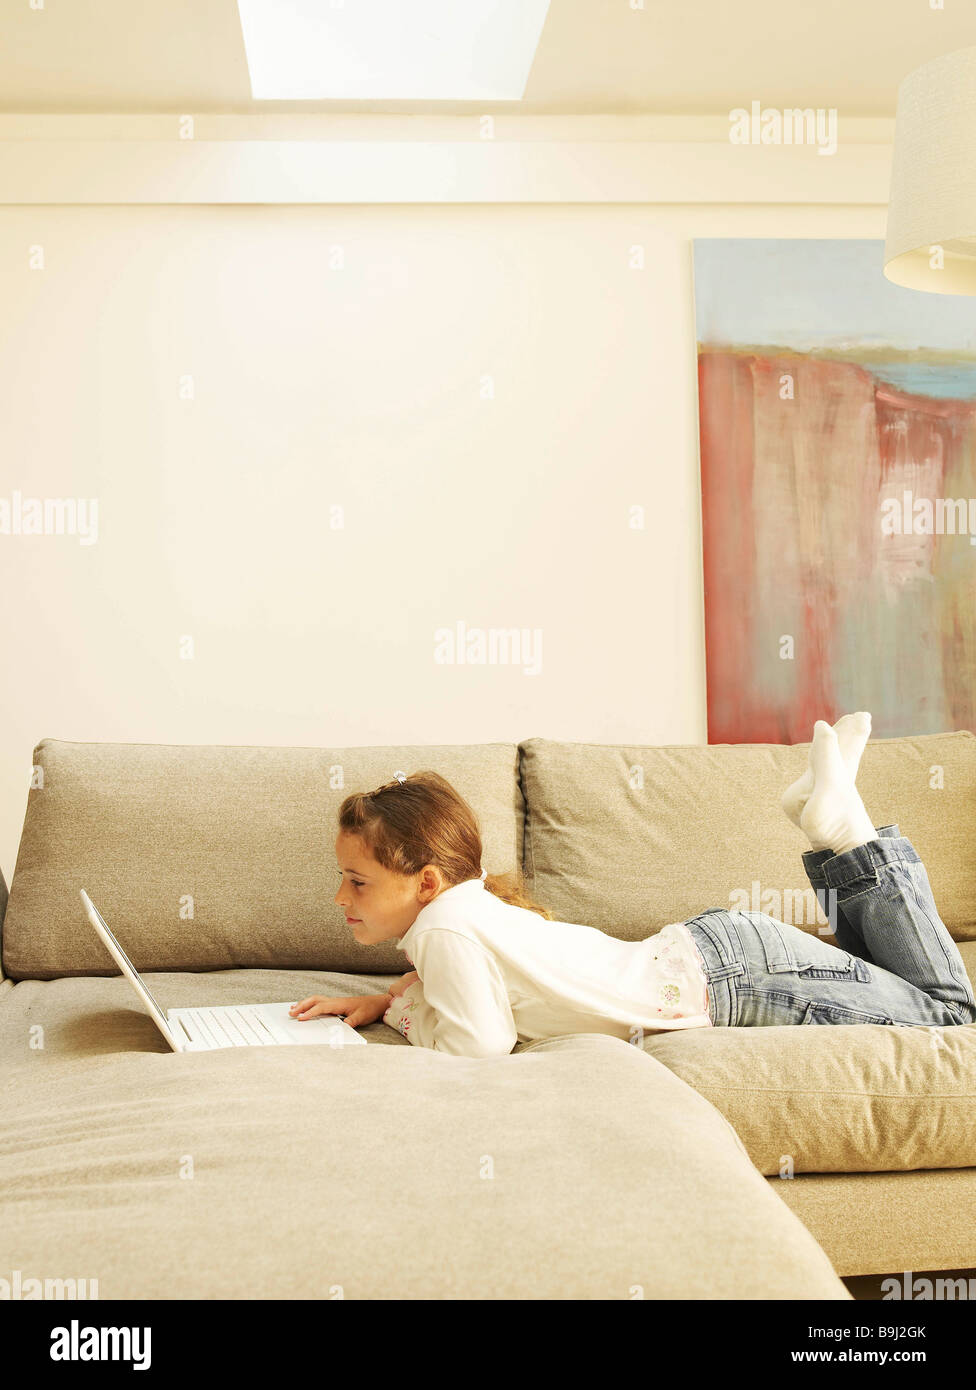 Girl lying on sofa using laptop Banque D'Images